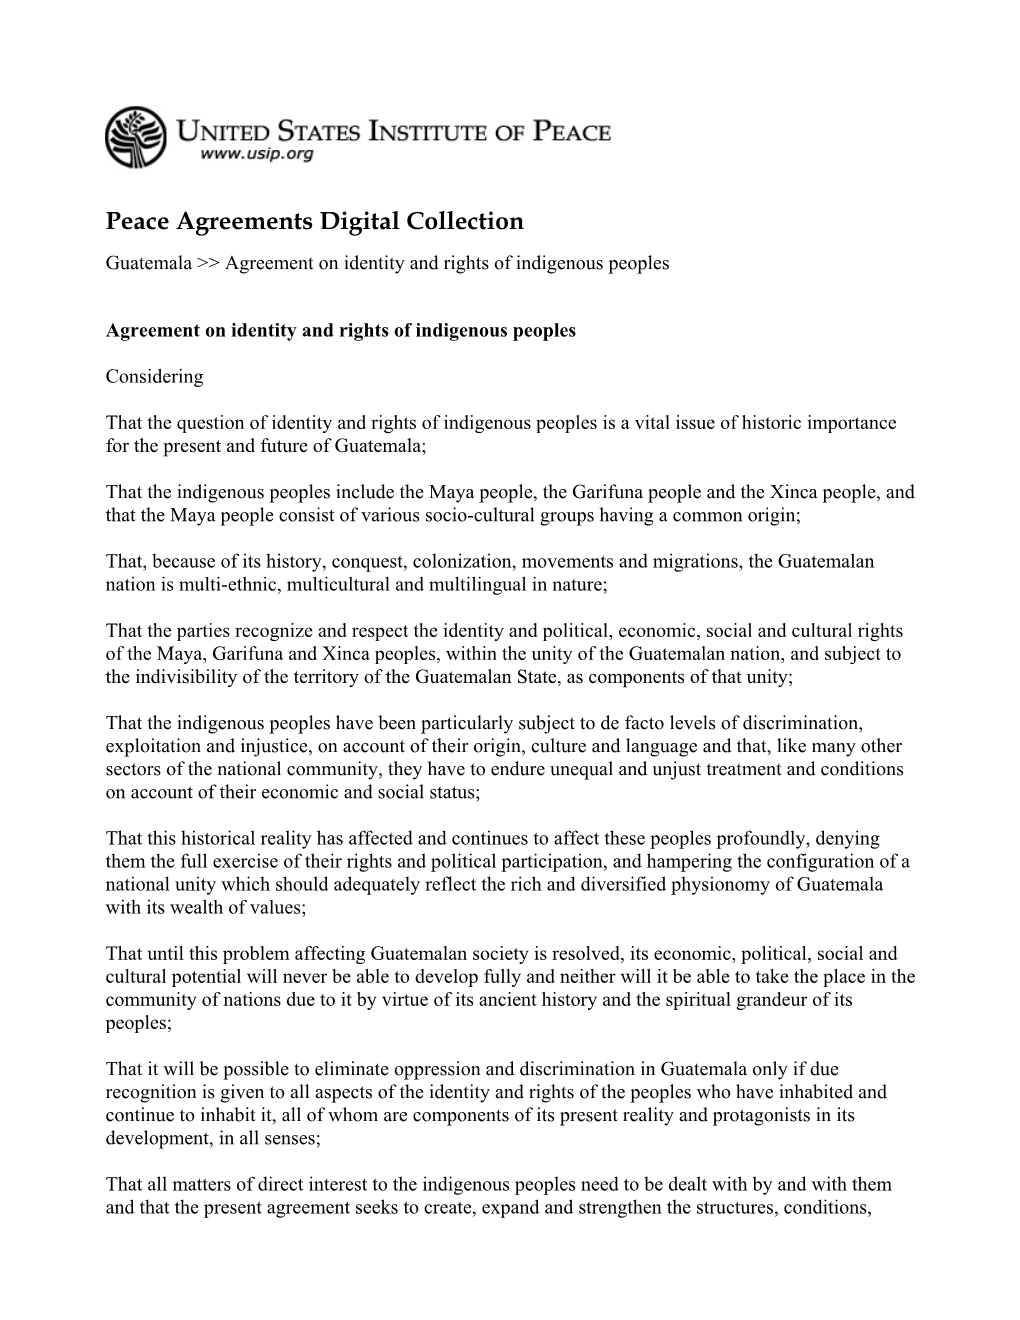 Agreement on Identity and Rights of Indigenous Peoples